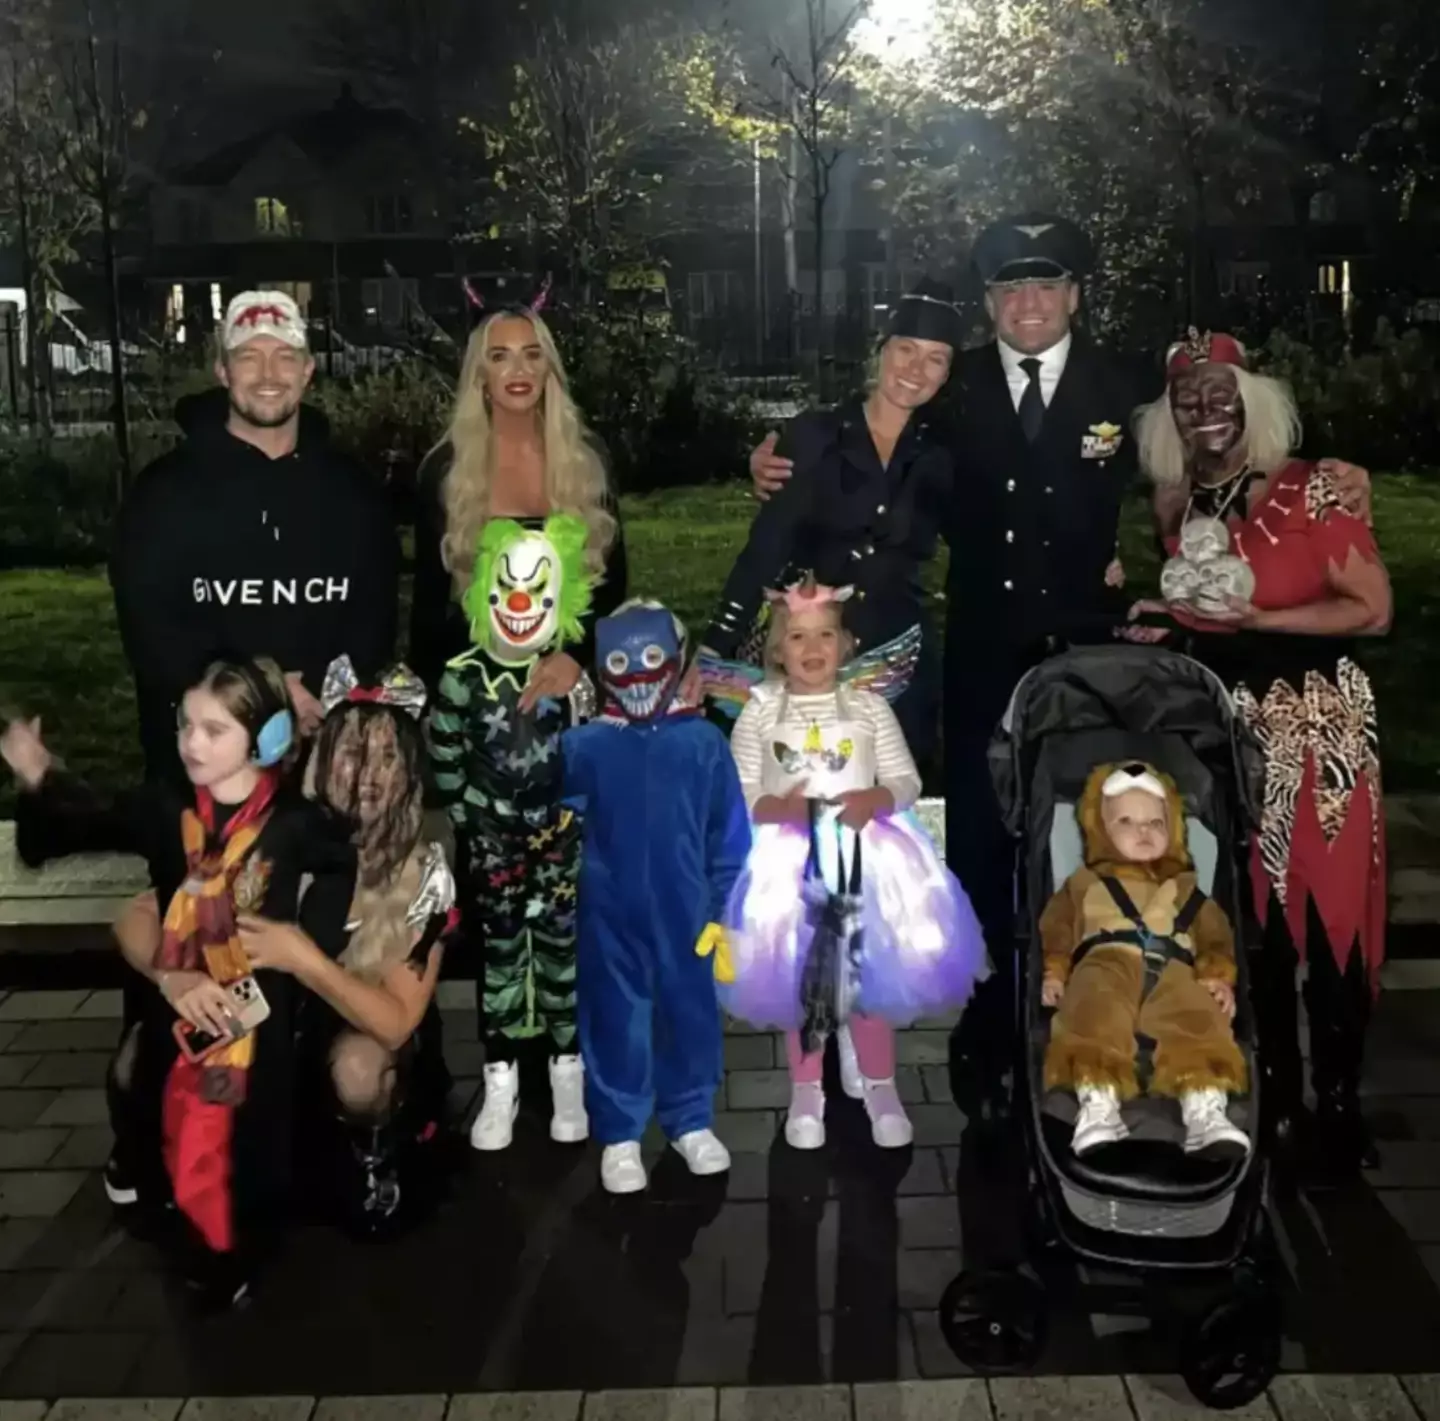 McGregor and family in costume. (Image